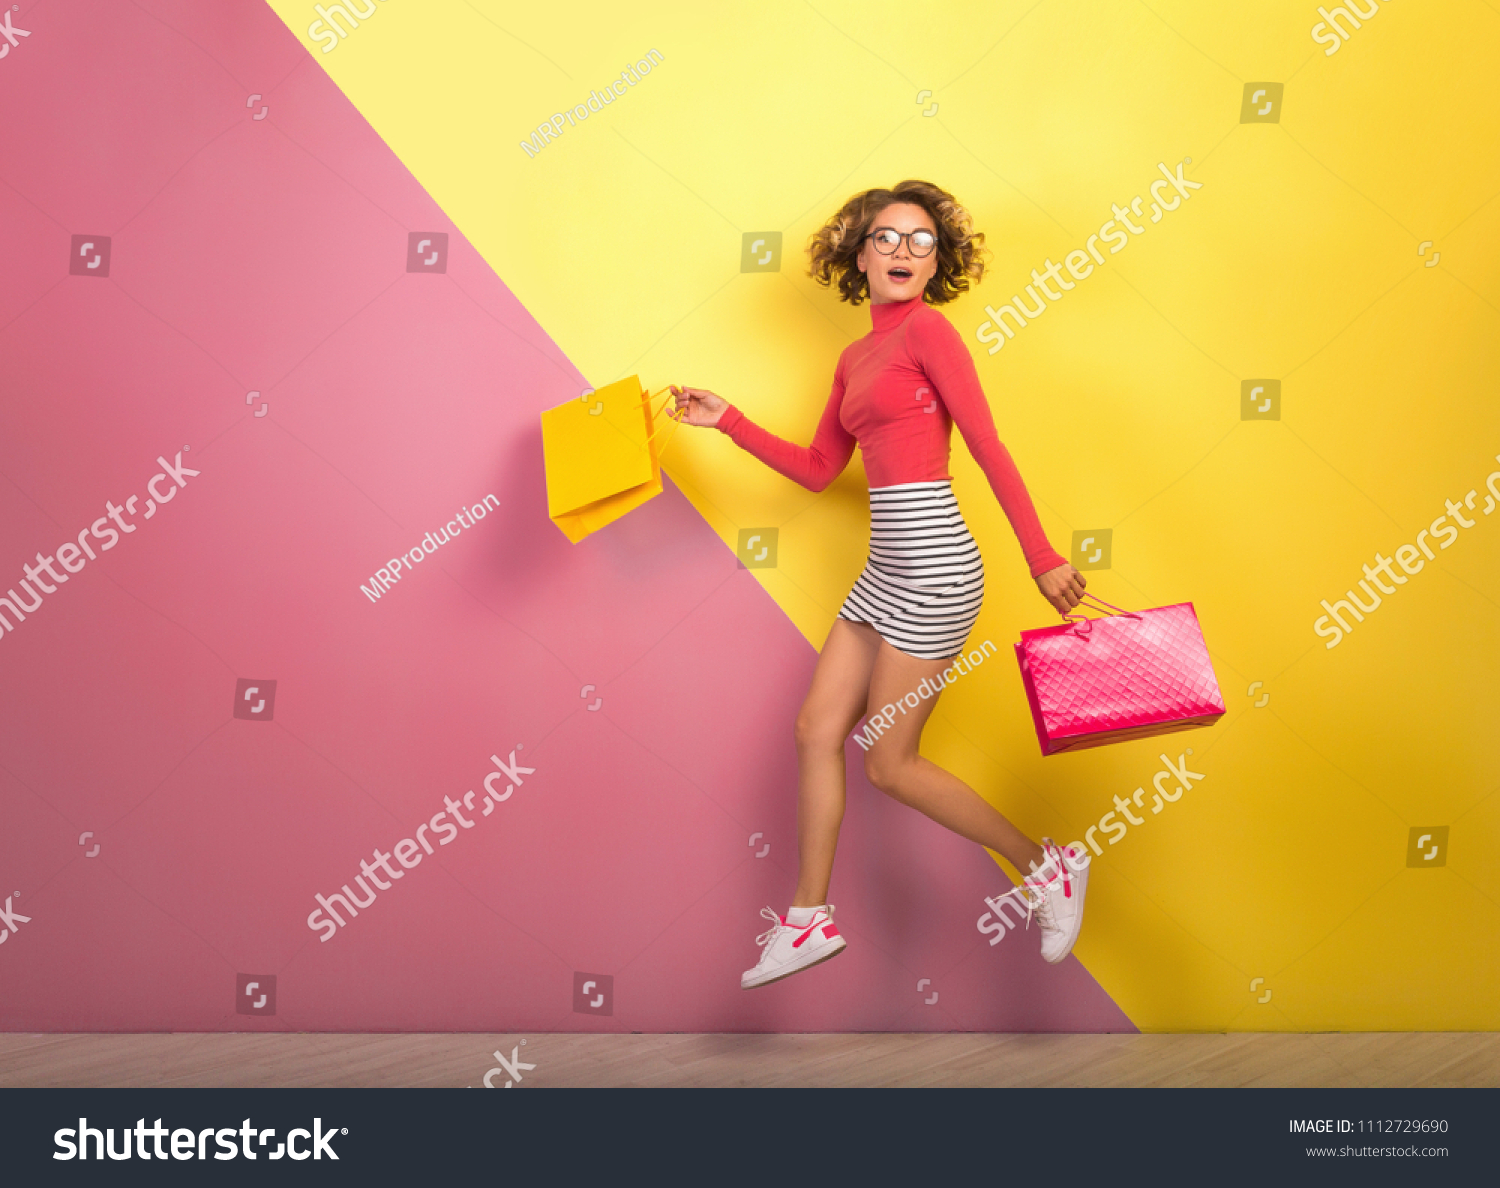 smiling attractive woman, stylish colorful outfit jumping with shopping bags, happy, pink yellow background, polo neck, striped mini skirt, sale, discount, shopaholic, fashion summer trend, emotional #1112729690